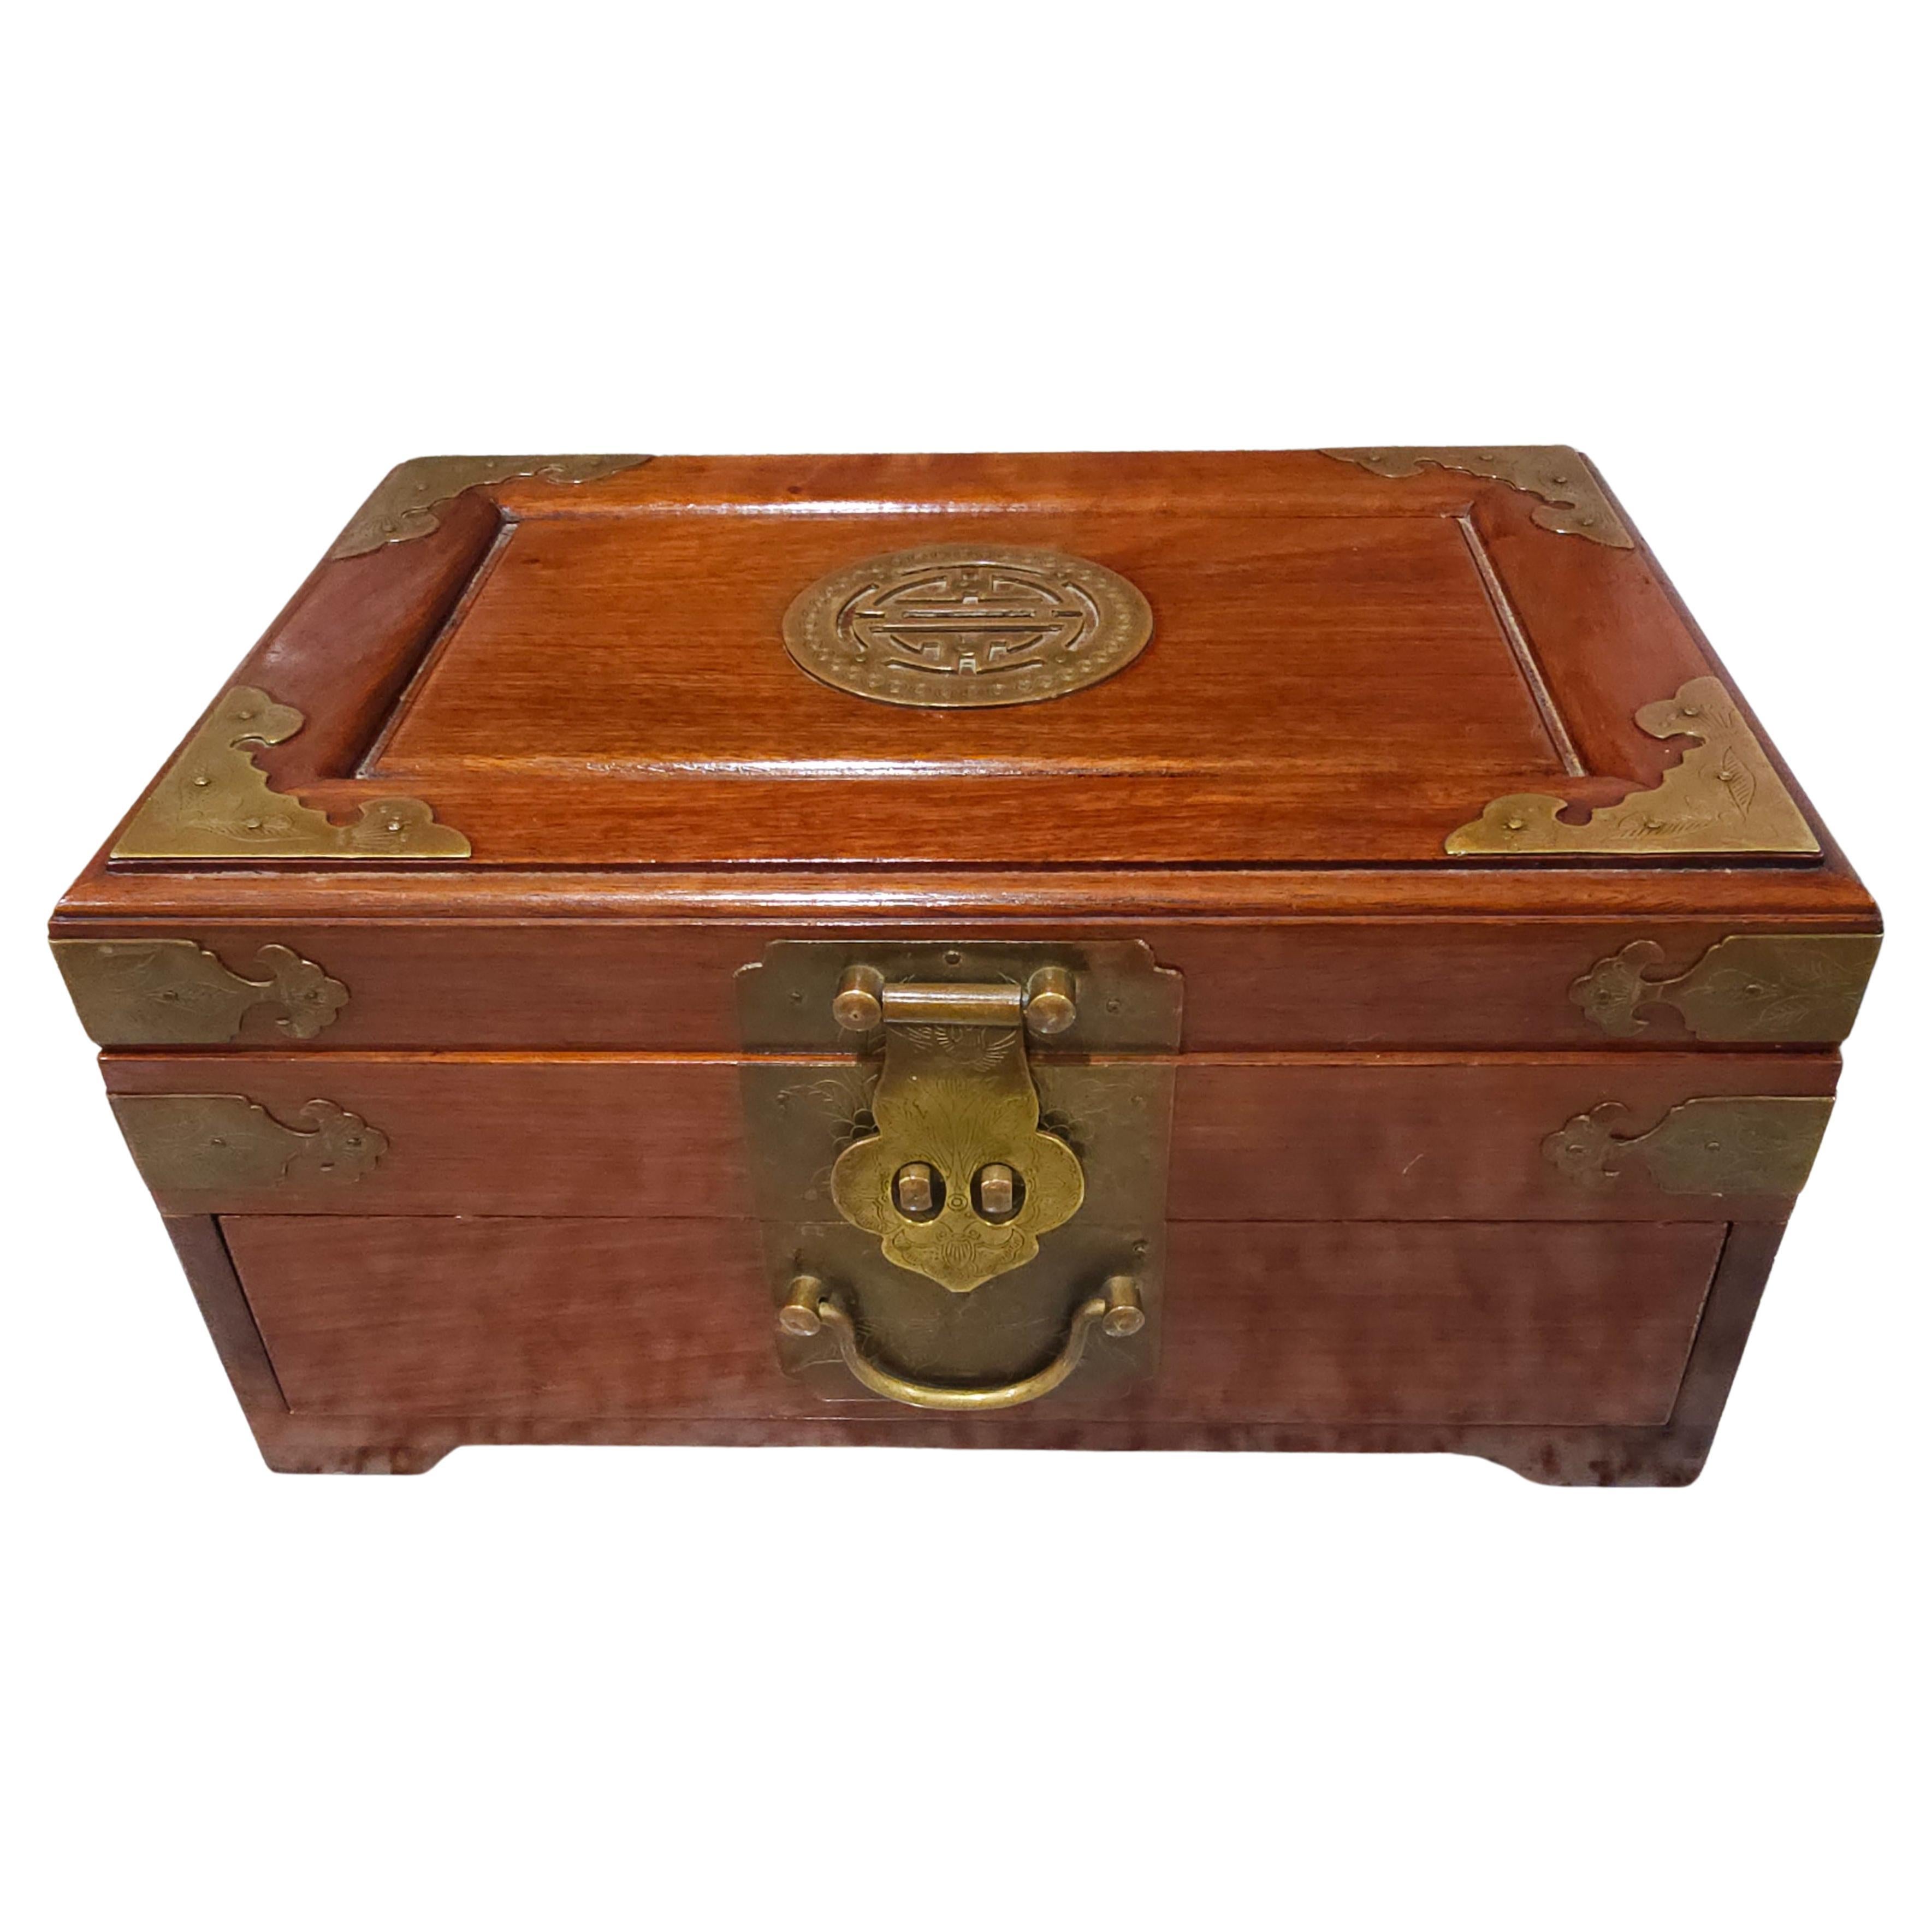 This is a Chinese jewelry box that is made out of rosewood with beautiful Chinoiserie brass trim. It is a nice heavy box that measures 12”W x 8”L x 6”H. The top layer inside holds 5 small compartments with 3 felt lined.  The bottom layer / Drawer